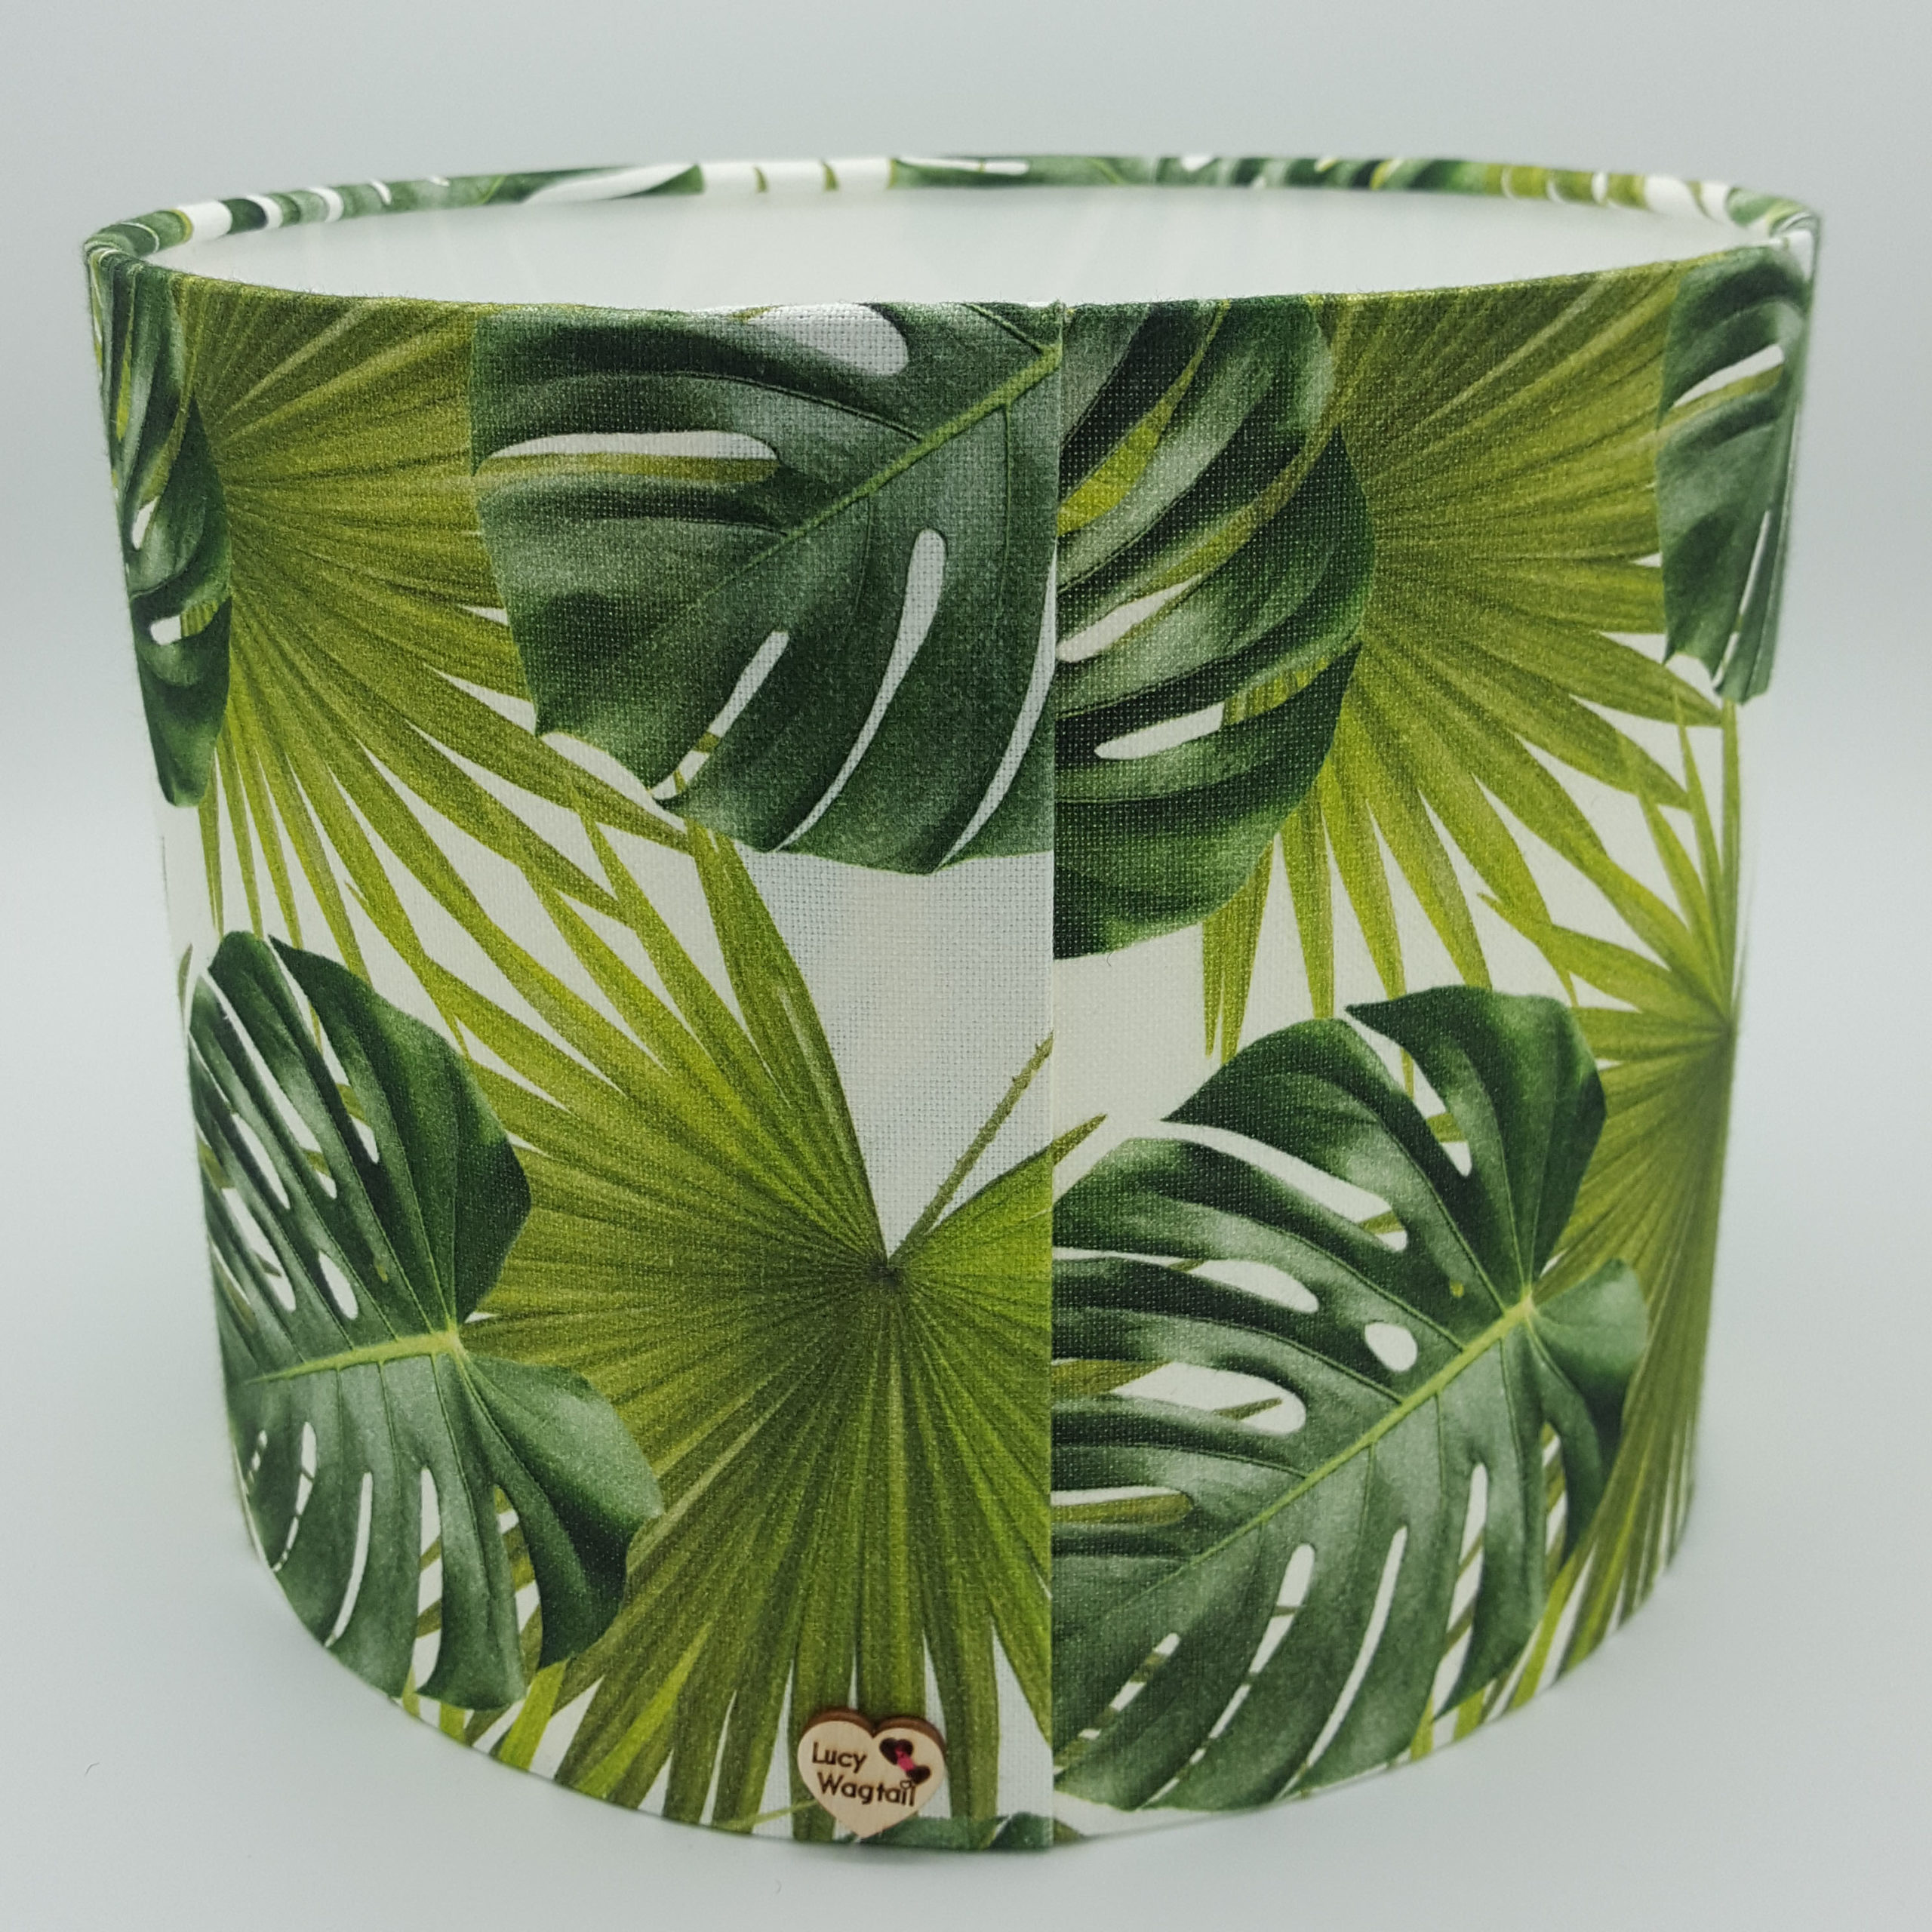 NEW HANDMADE LAMPSHADE PALM LEAVES TEAL TROPICAL LEAF 